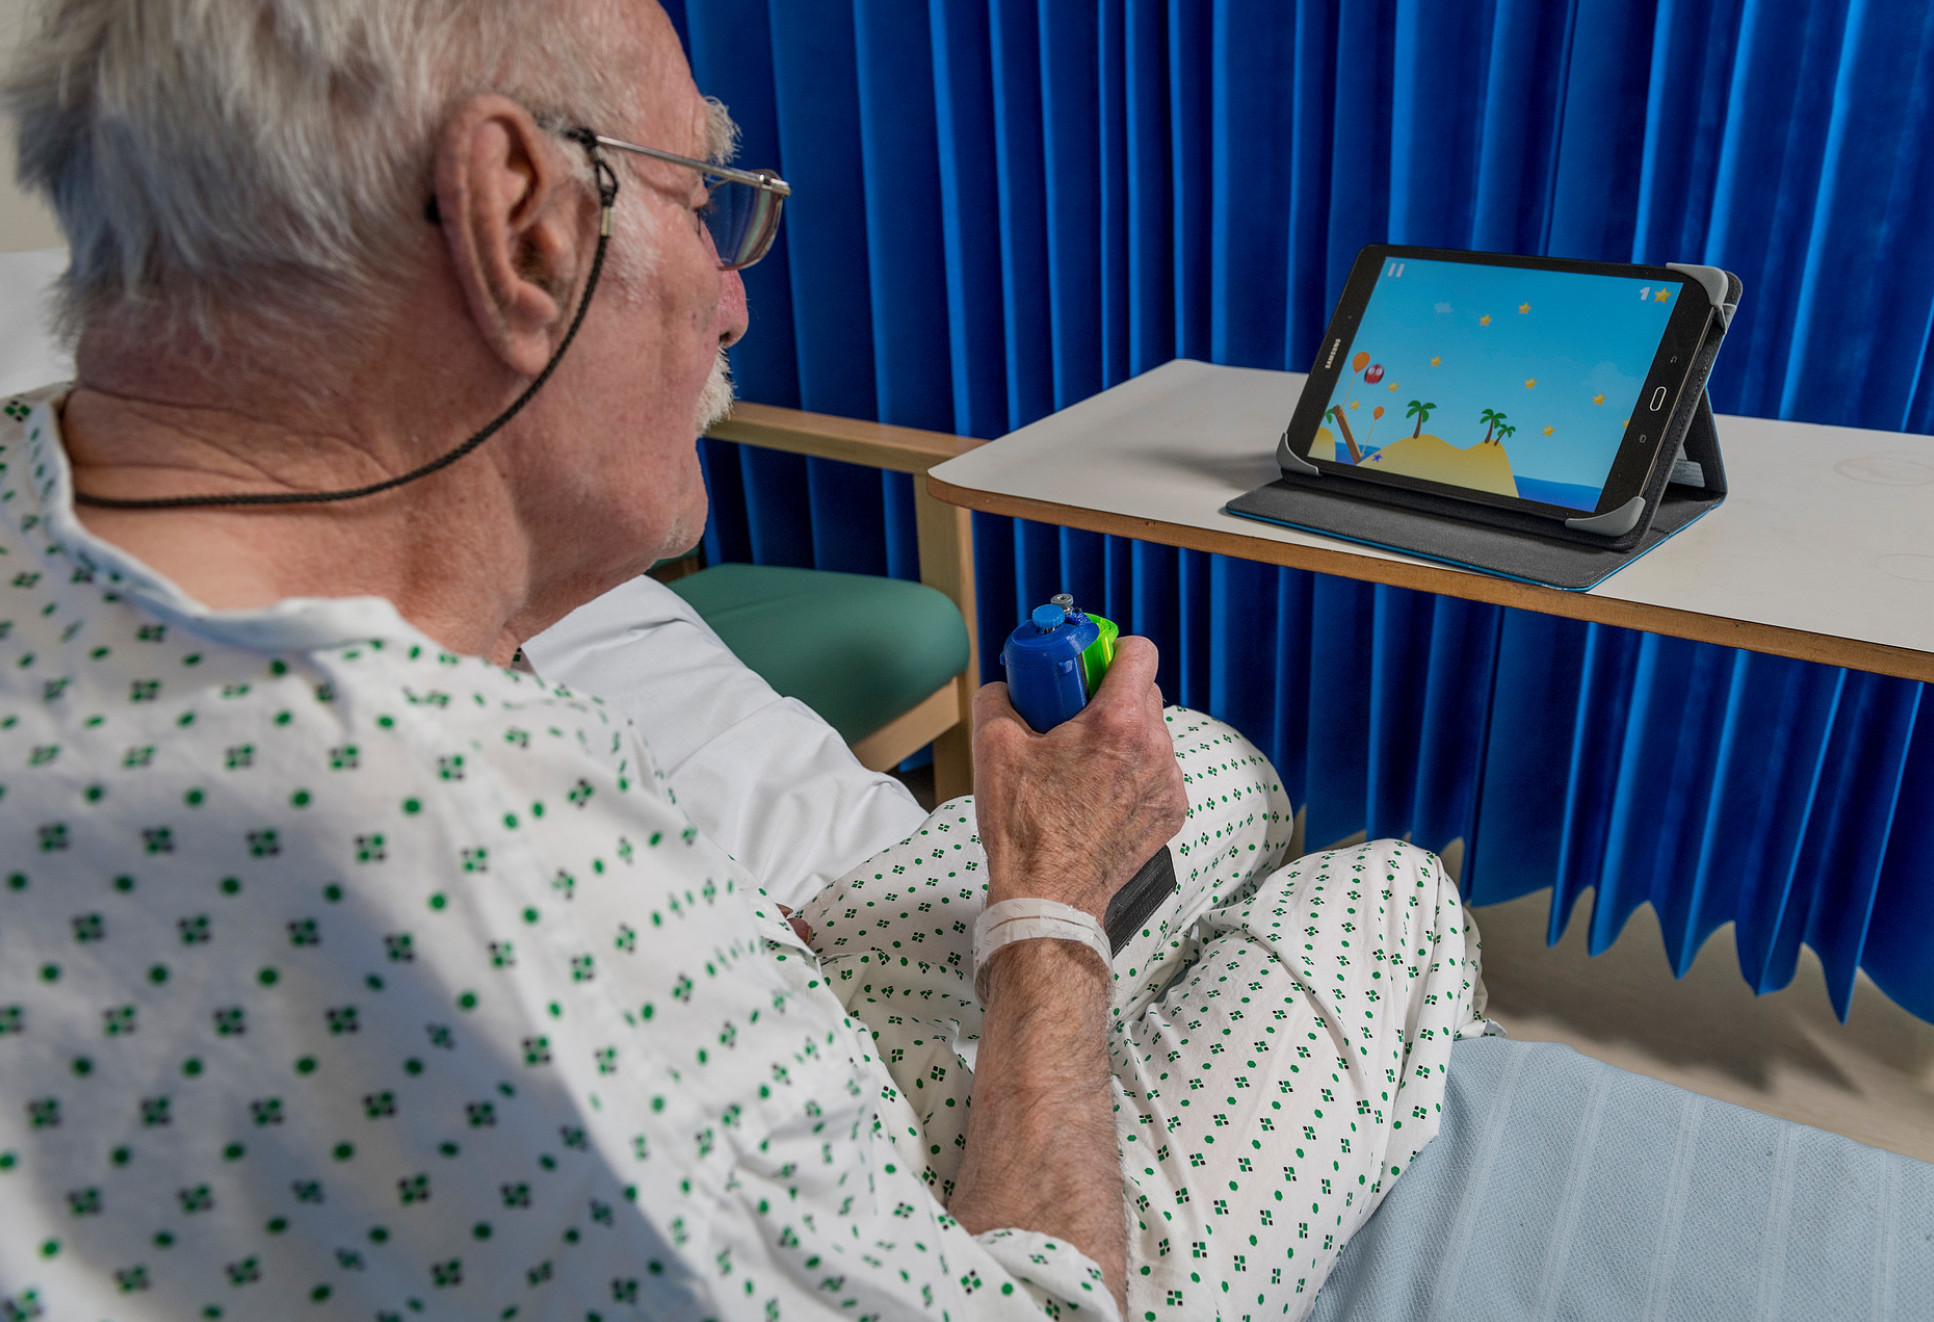 An elderly man uses the gripable device to play a game on an iPad